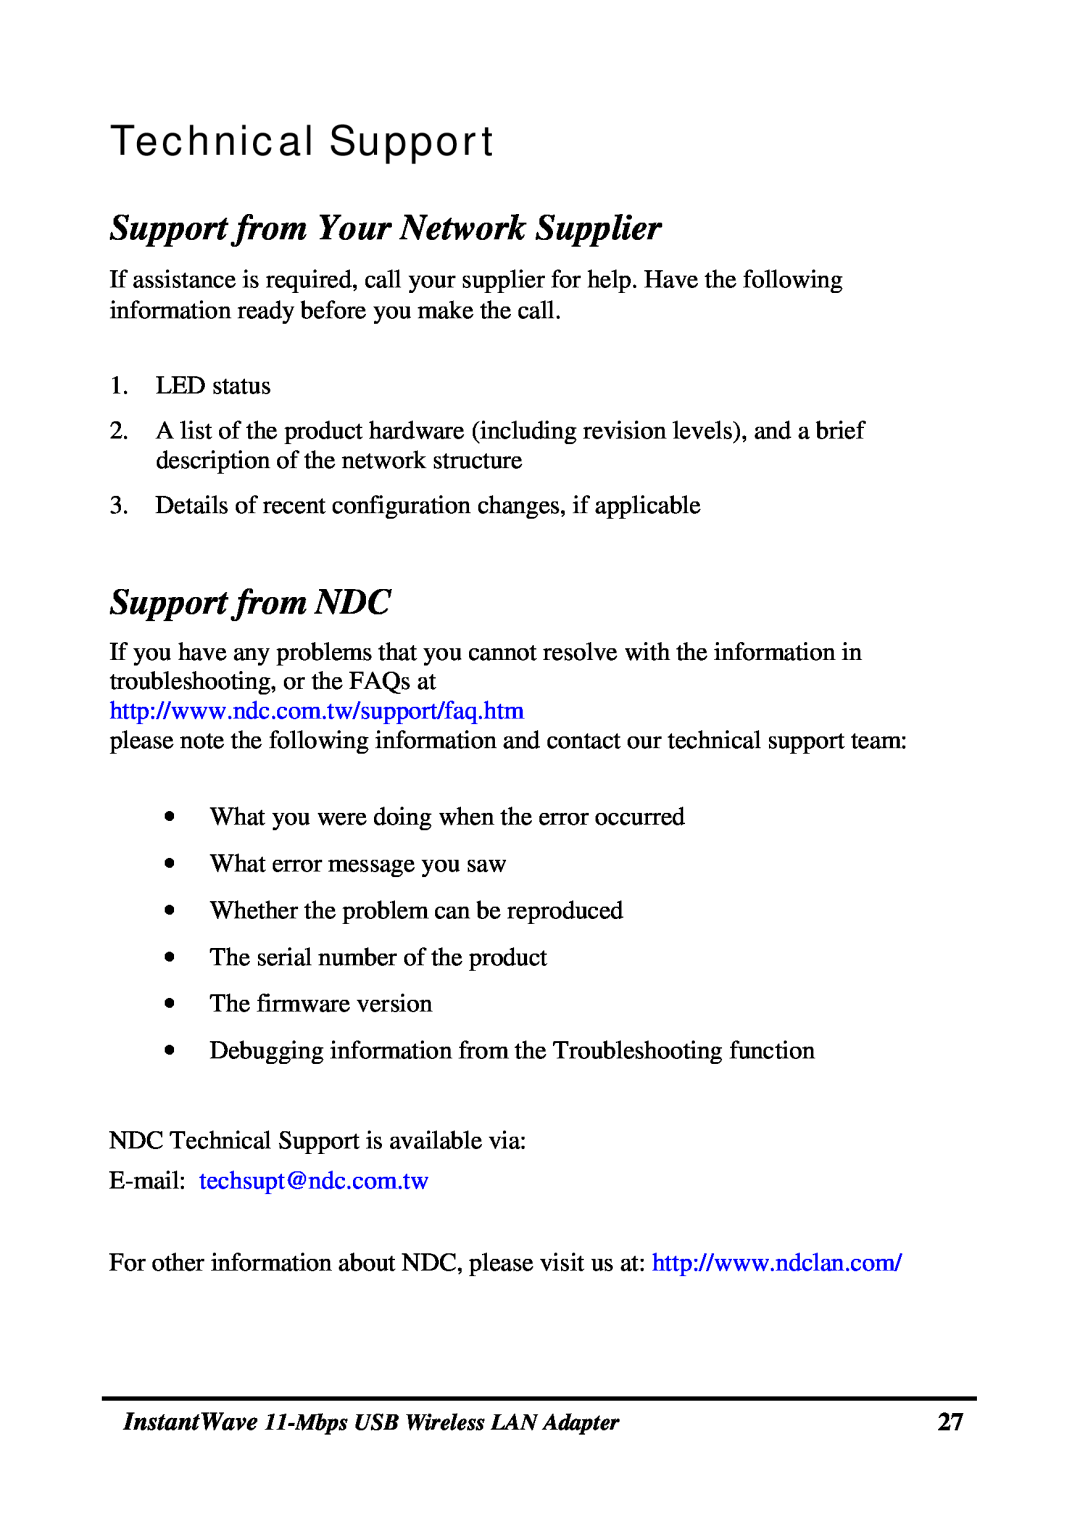 NDC comm NWH4020 manual Technical Support, Support from Your Network Supplier, Support from NDC, E-mail techsupt@ndc.com.tw 